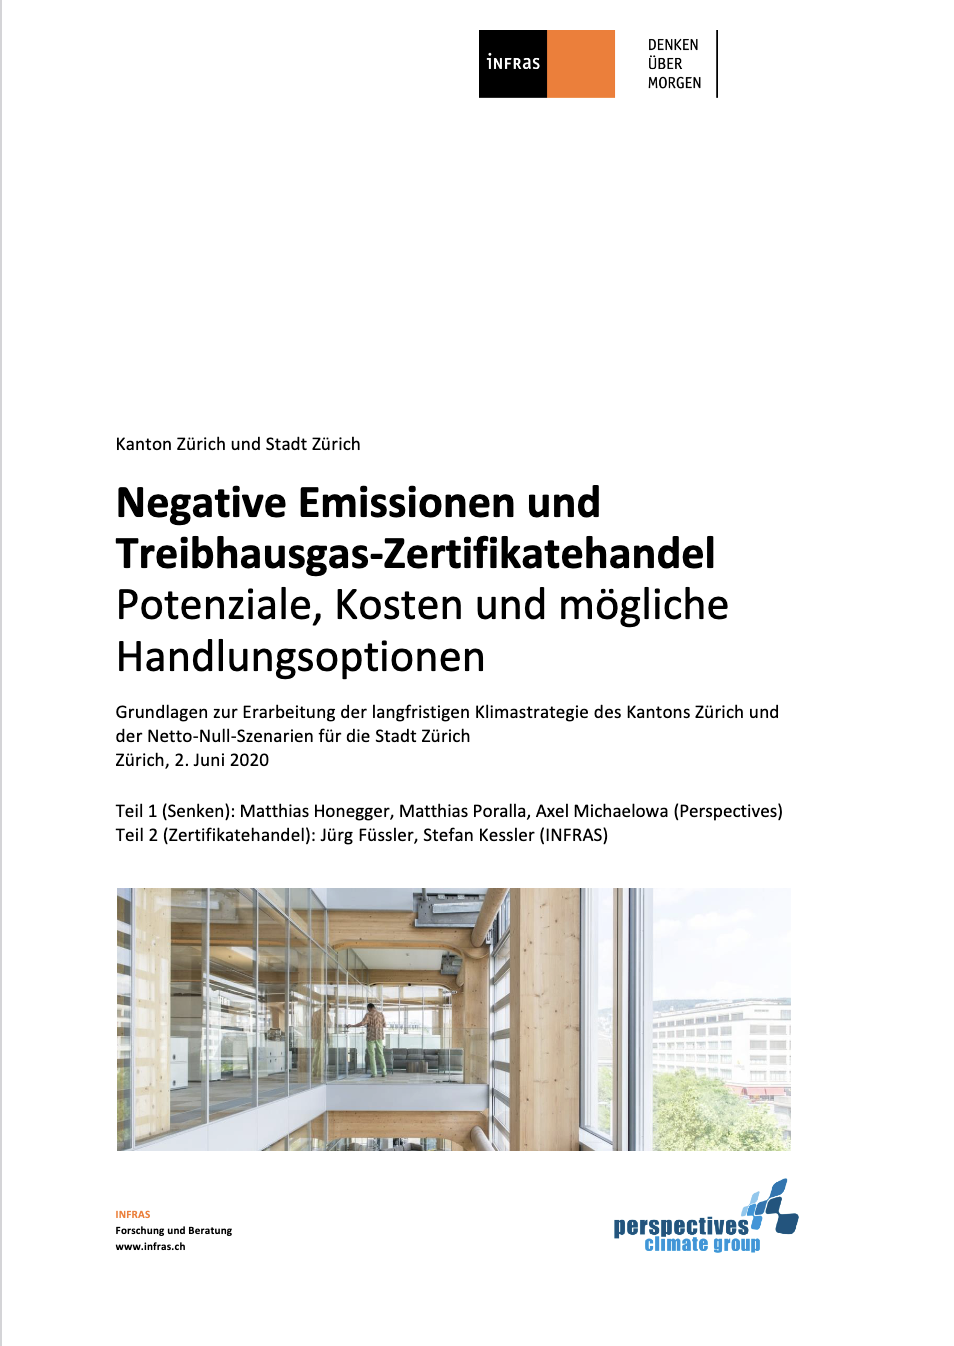 Net-Zero Emissions Zurich: Negative emissions and certificate trading – potential, costs and possible courses of action